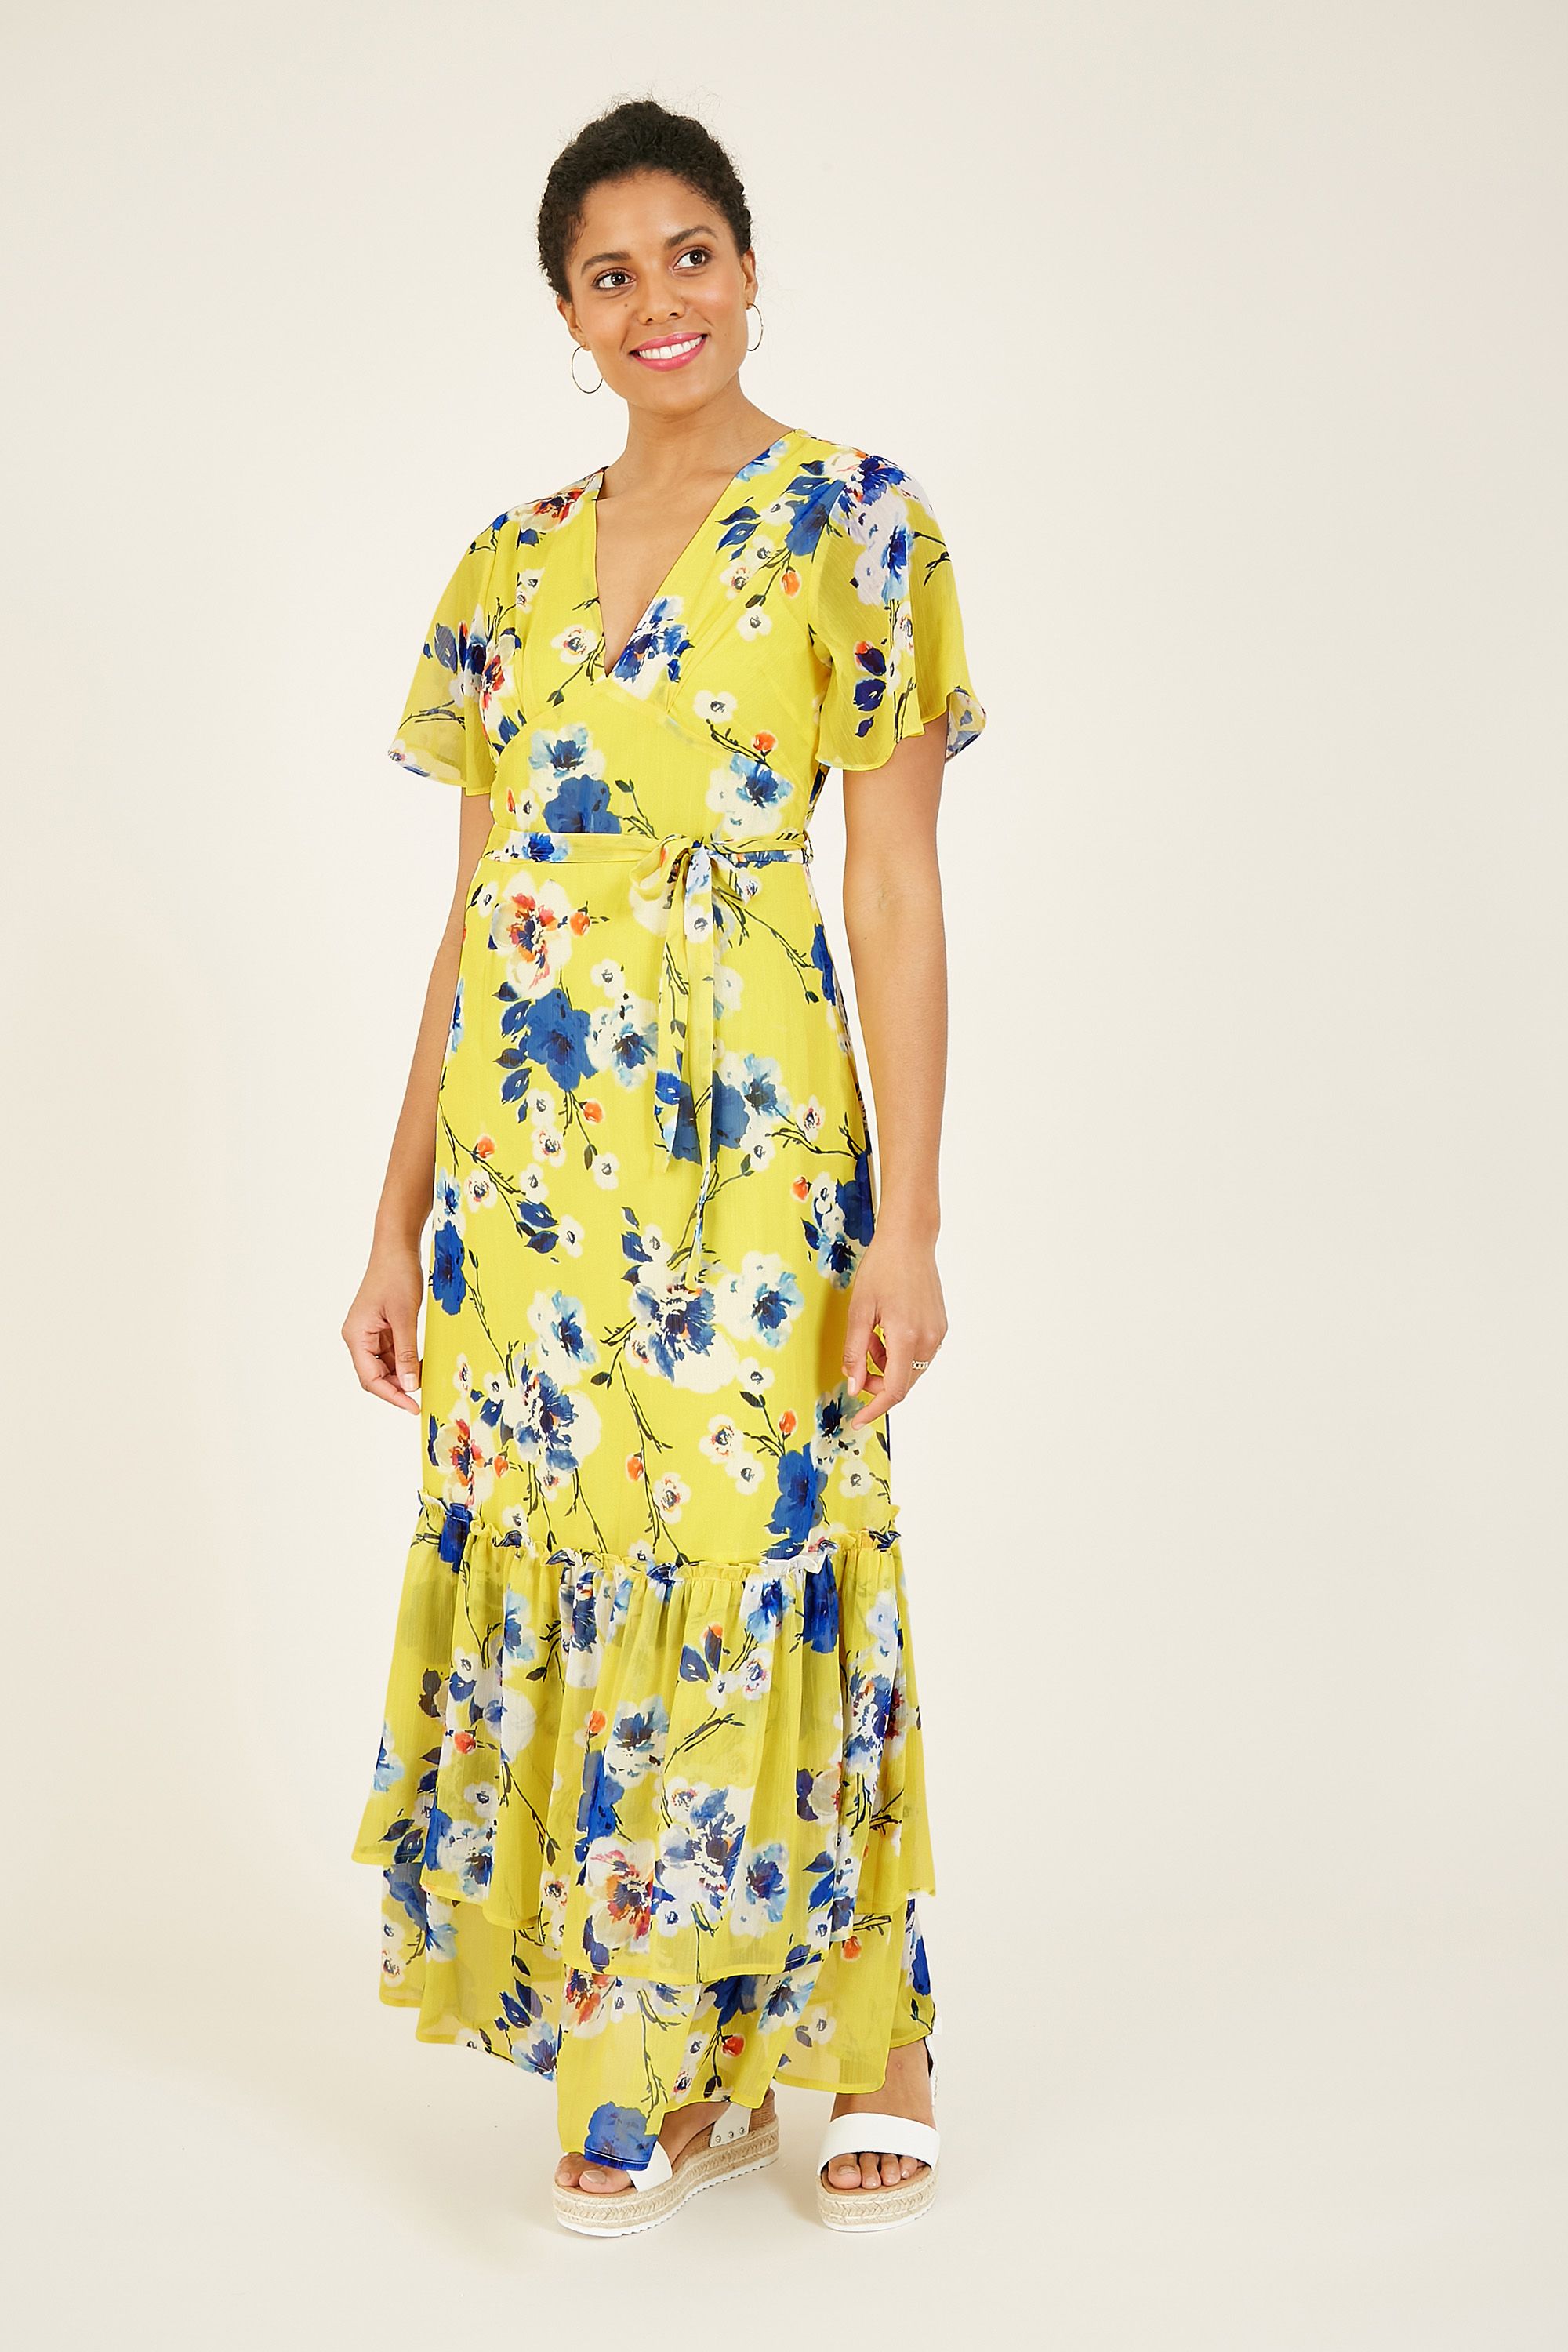 A truly versatile, lightweight piece, our Yumi Yellow Floral Maxi Dress brings a cheerful dash of colour to any wardrobe and can be easily styled up or down. Featuring a self tie waist belt, classic boxy sleeves and a cute peep button fastening. The result? A timeless, ultra-flattering fit. Pair with strappy heels and a matching clutch, or for an edgier, year-round look, think chunky boots, statement earrings and a knitted cardigan.  100% Polyester Machine Wash At 30 Length is 138.5CM